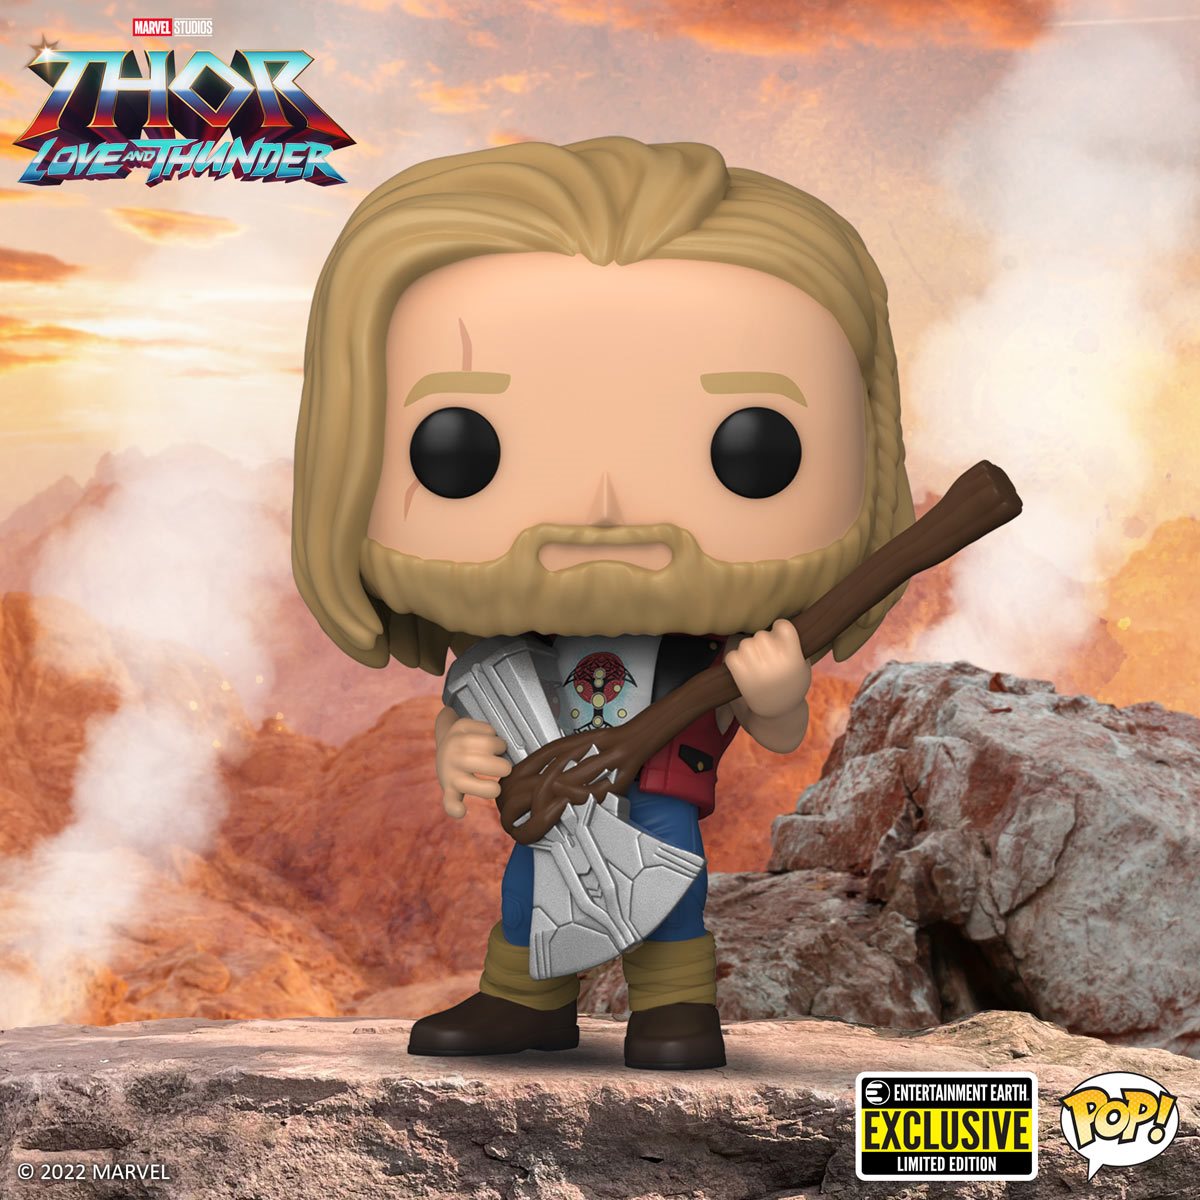 Love and Thunder Ravager Thor Funko Pop! Vinyl Figure #1085 Exclusive